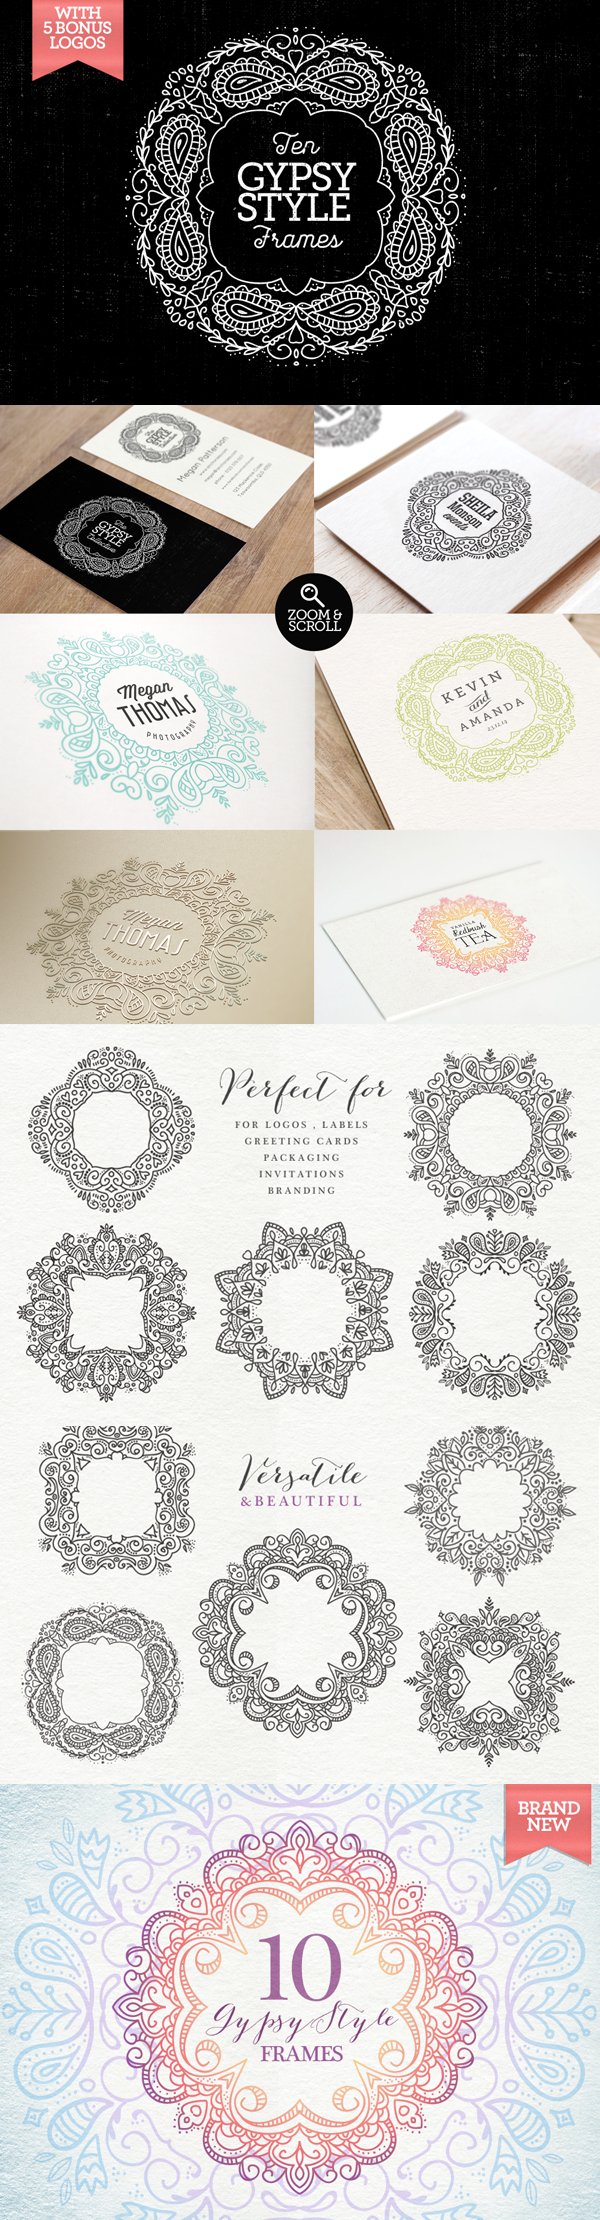 Eastern indian gypsy lace border frame decorative resource purchase sale buy graphics elements vector logo